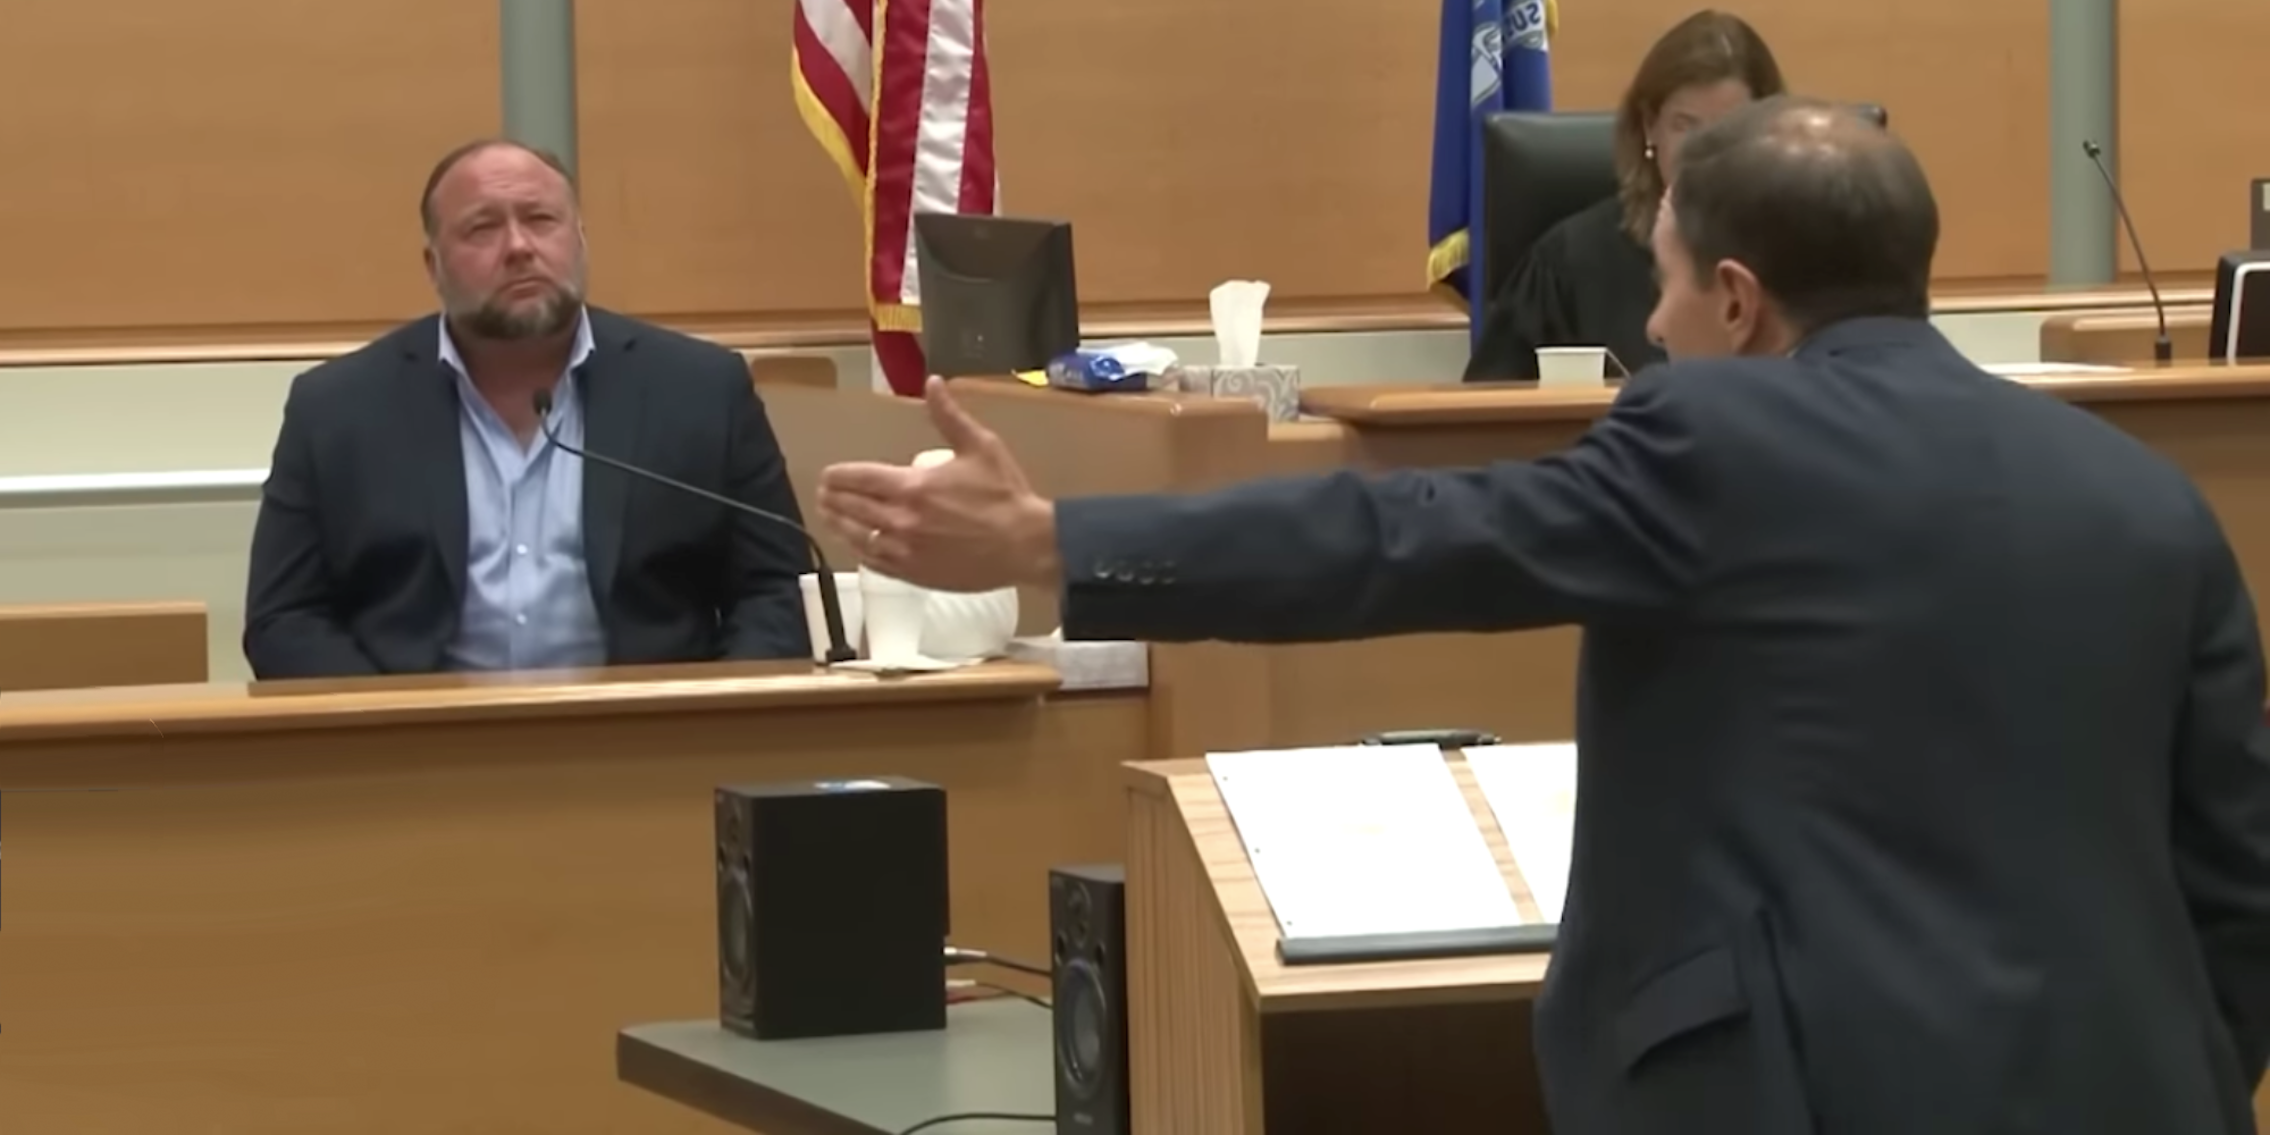 Alex Jones on the stand in a court room